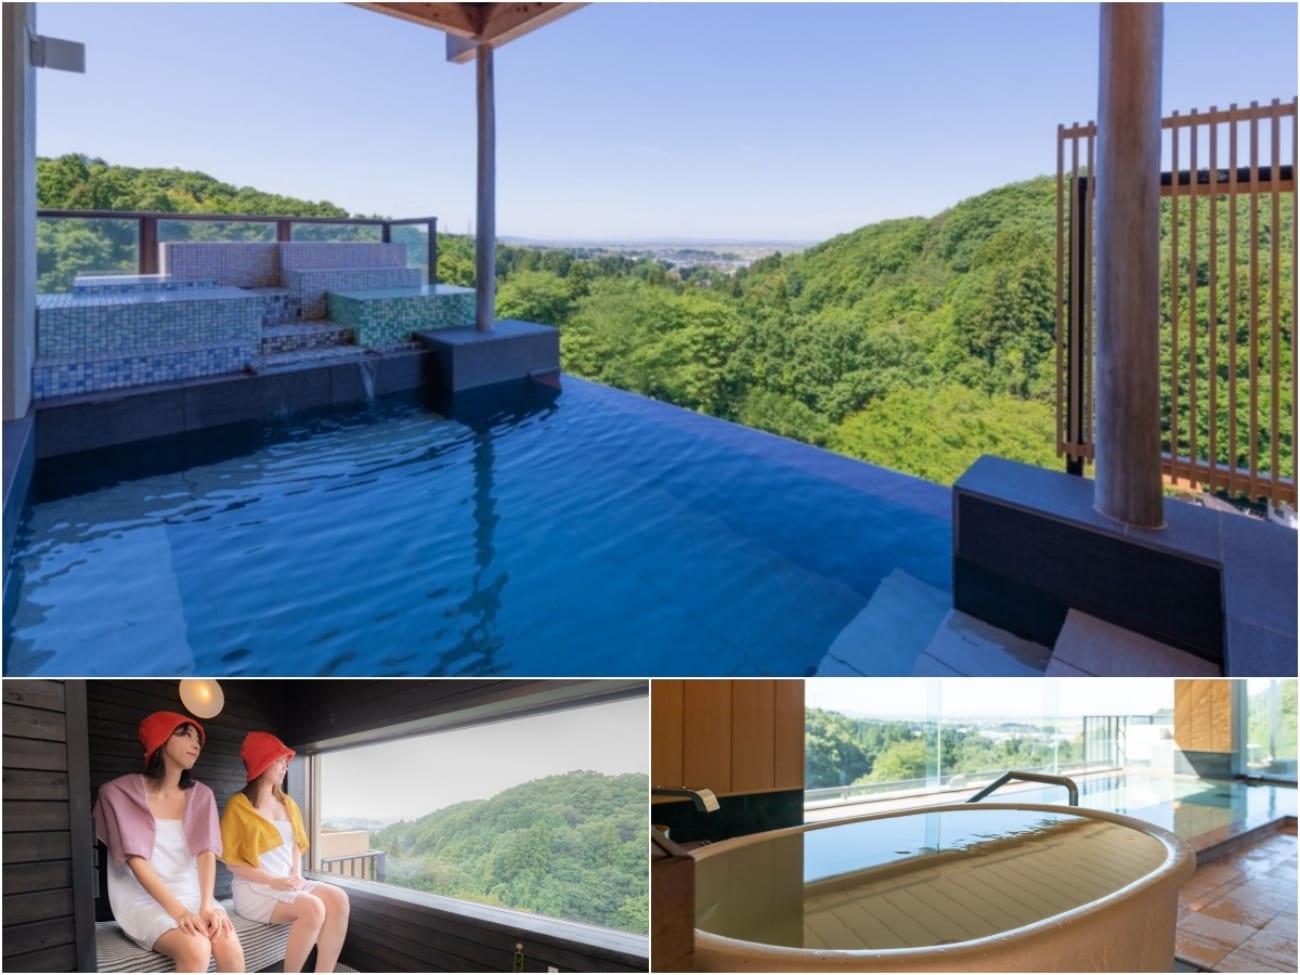 2020 Infinity open-air bath is born ★ Overlooking the Echigo Plain together with nature!